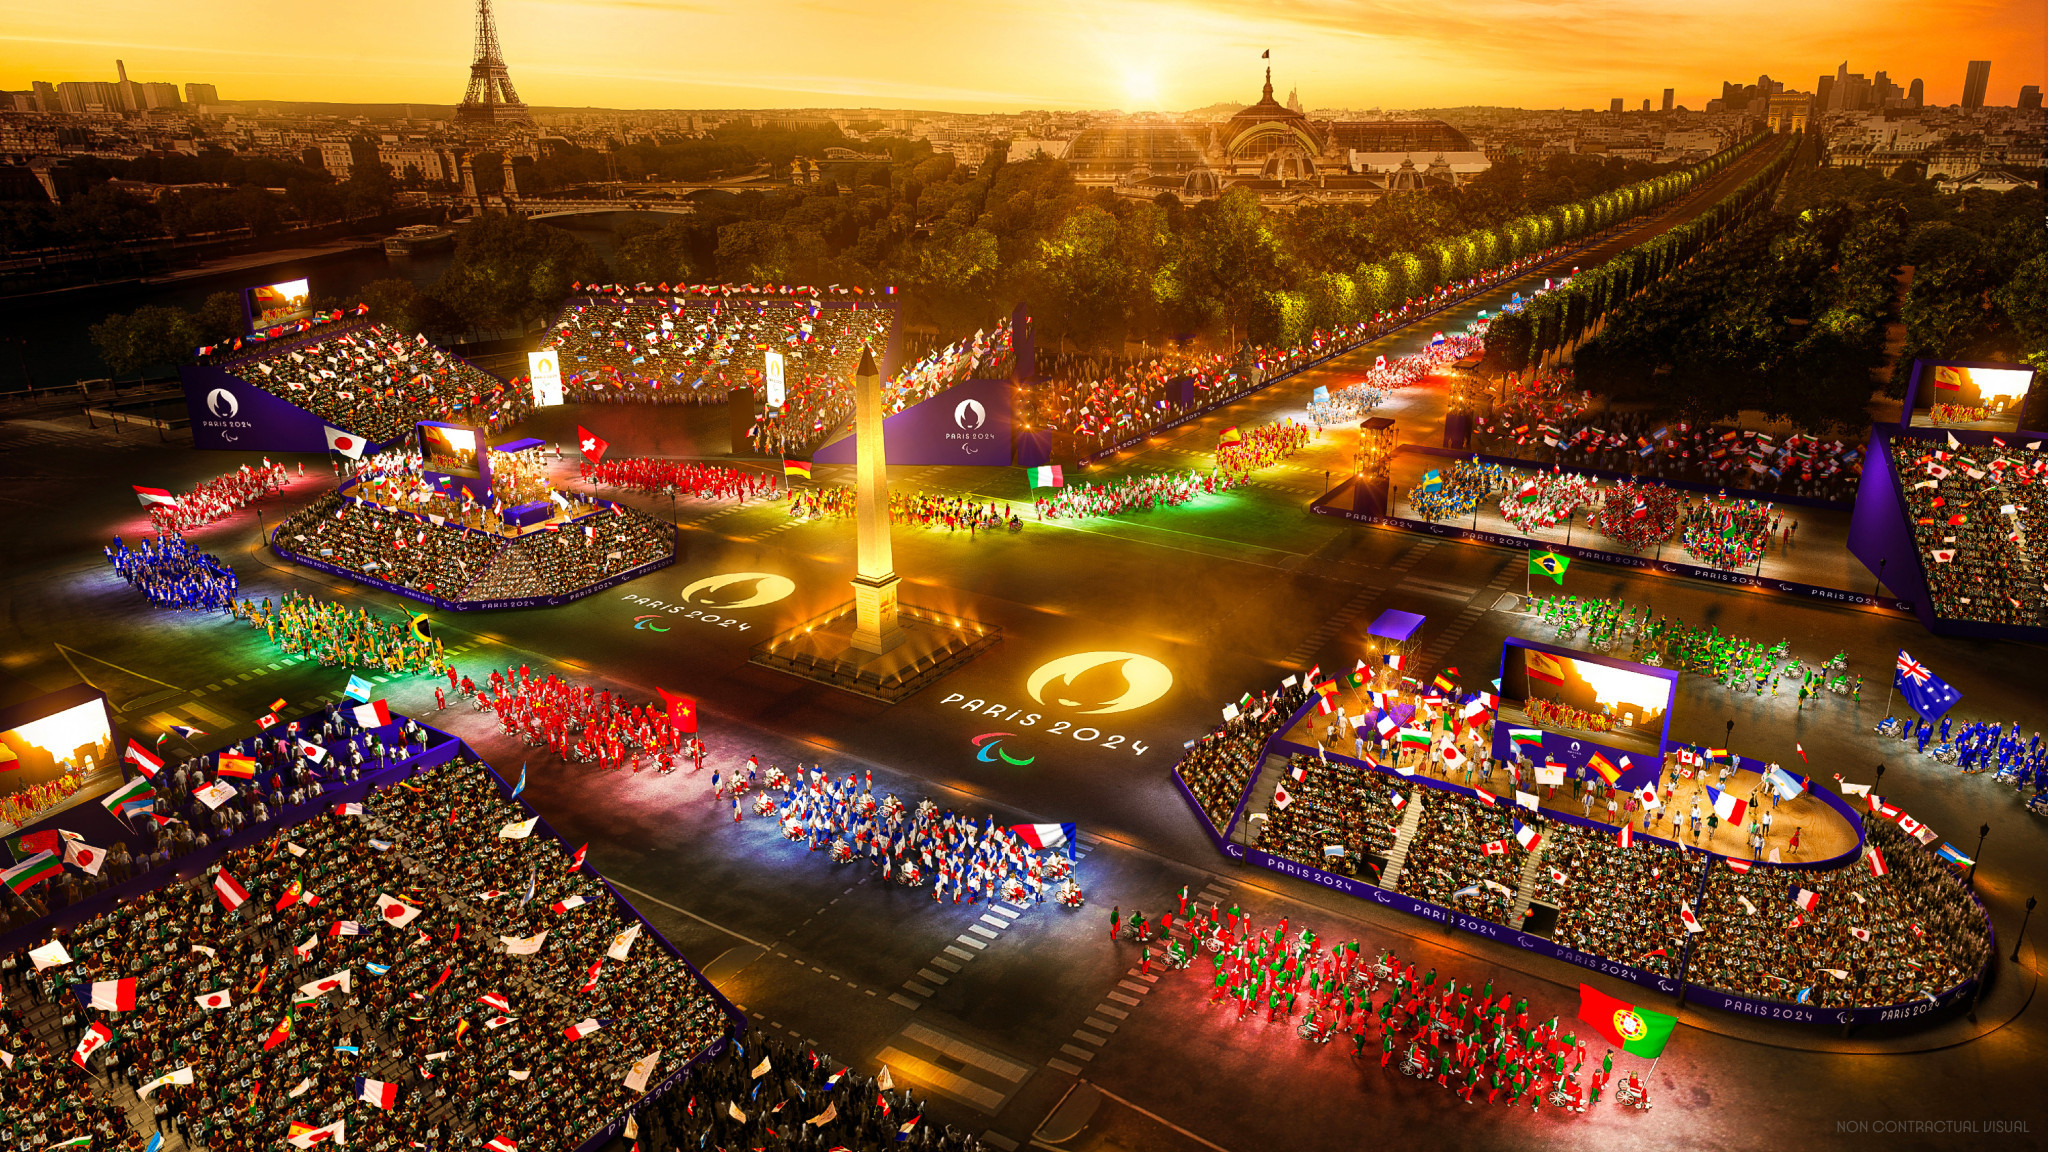 The Paralympic Games will feature an athletes parade down the Champs Elysees to the Place de la Concorde ©Paris 2024 